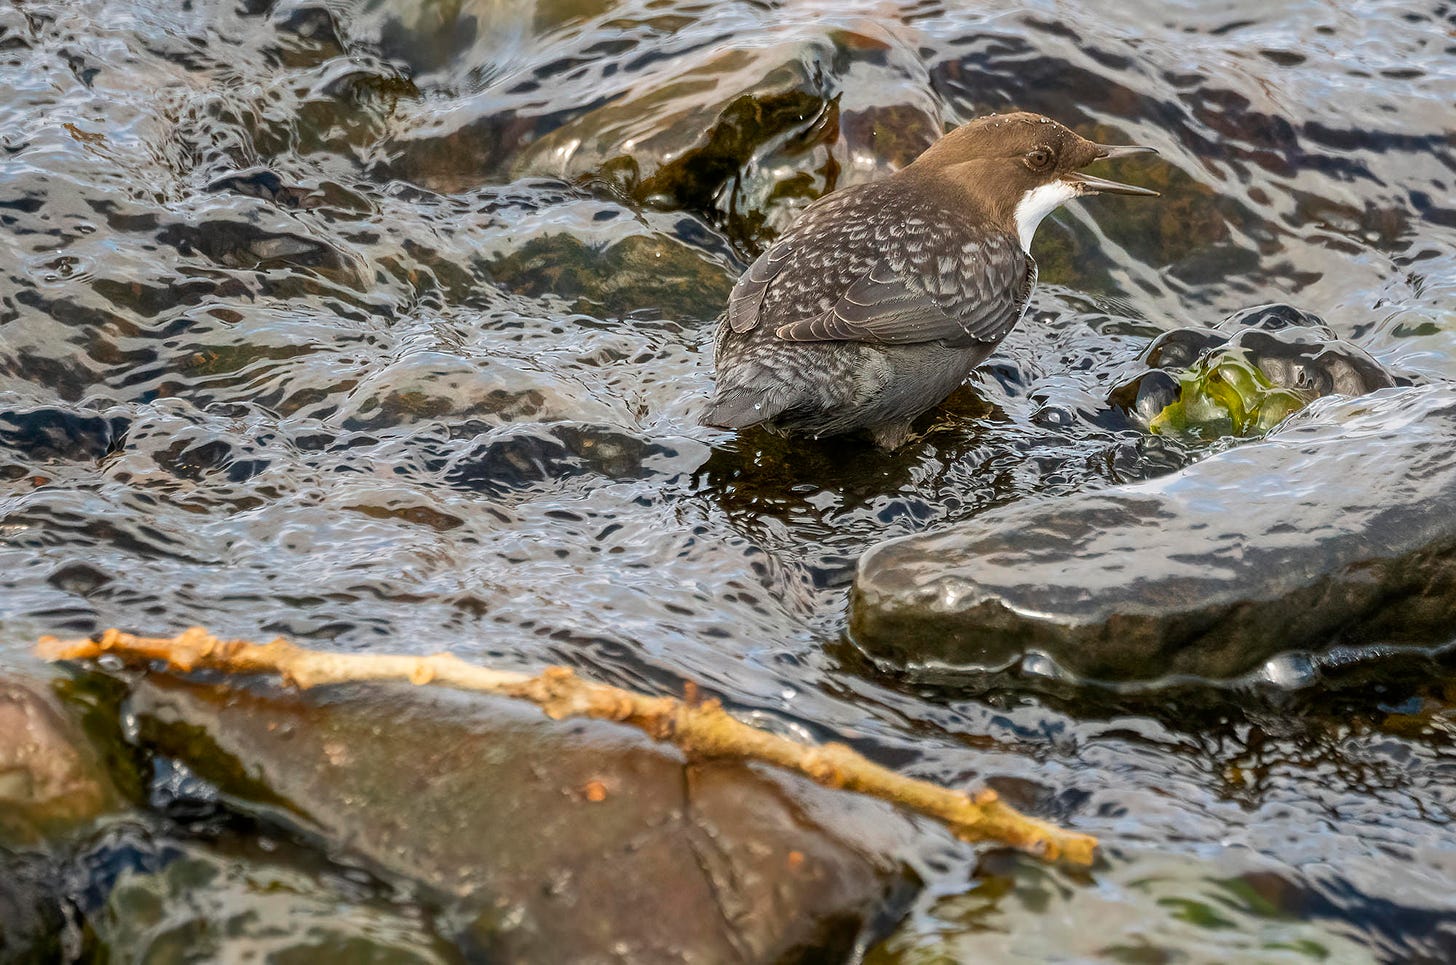 Photo of a dipper perched on a rock in a river with its beak open